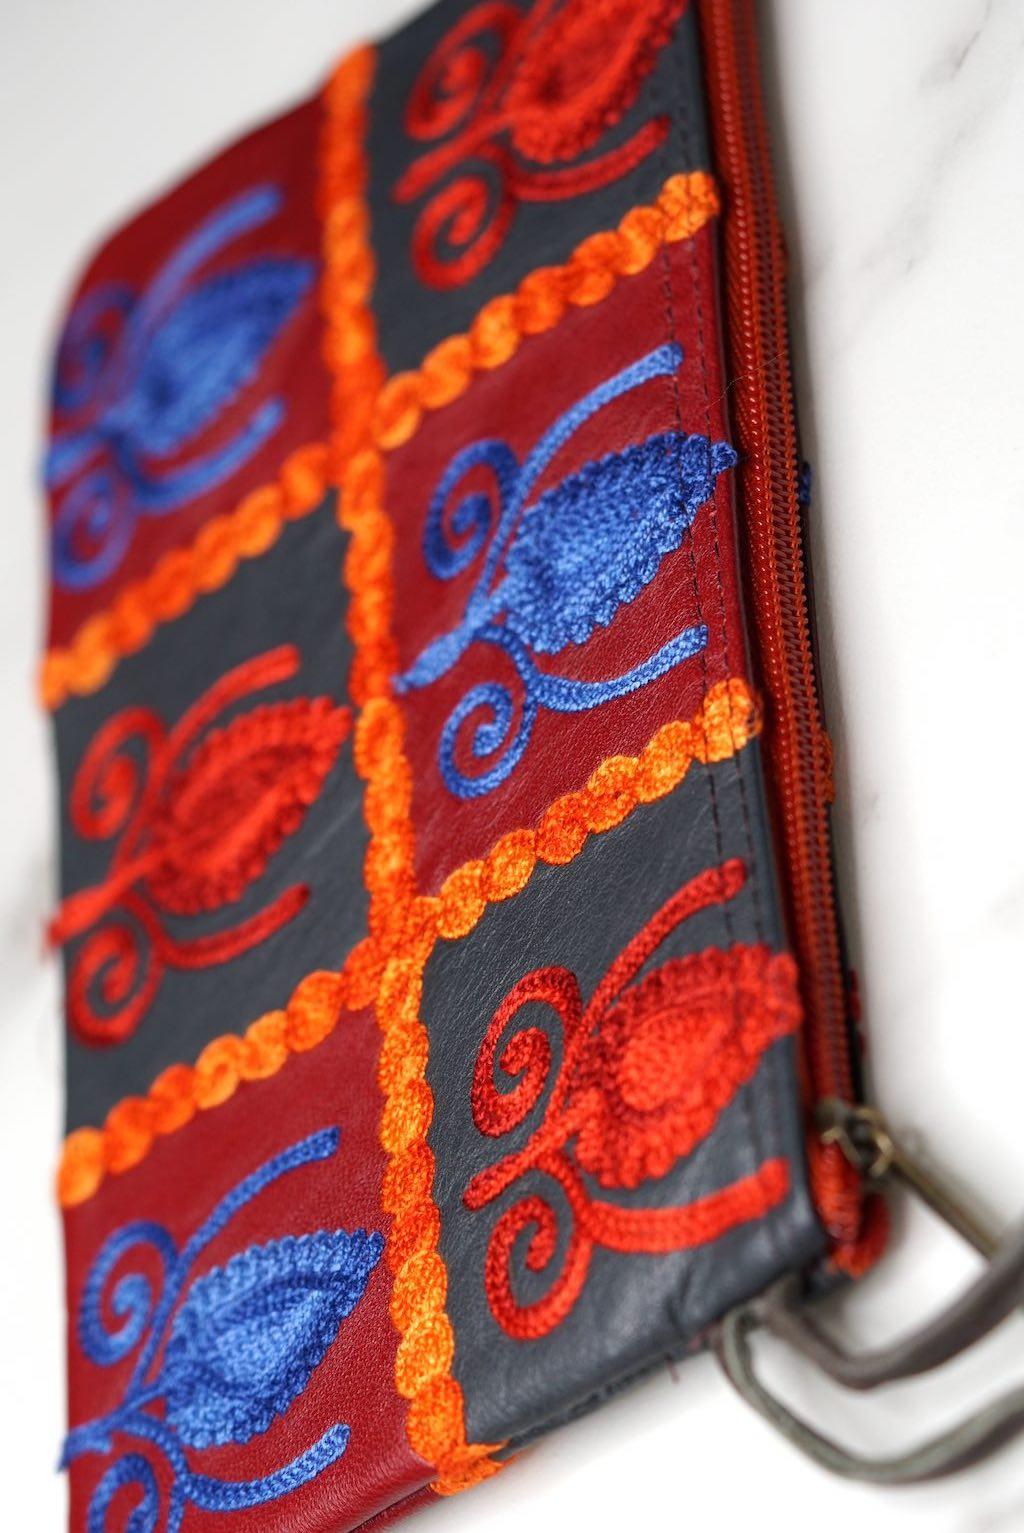 Vibrant colorful purse with kashmiri hand embroidery, has a secure zip top closure, ethically made in Nepal.